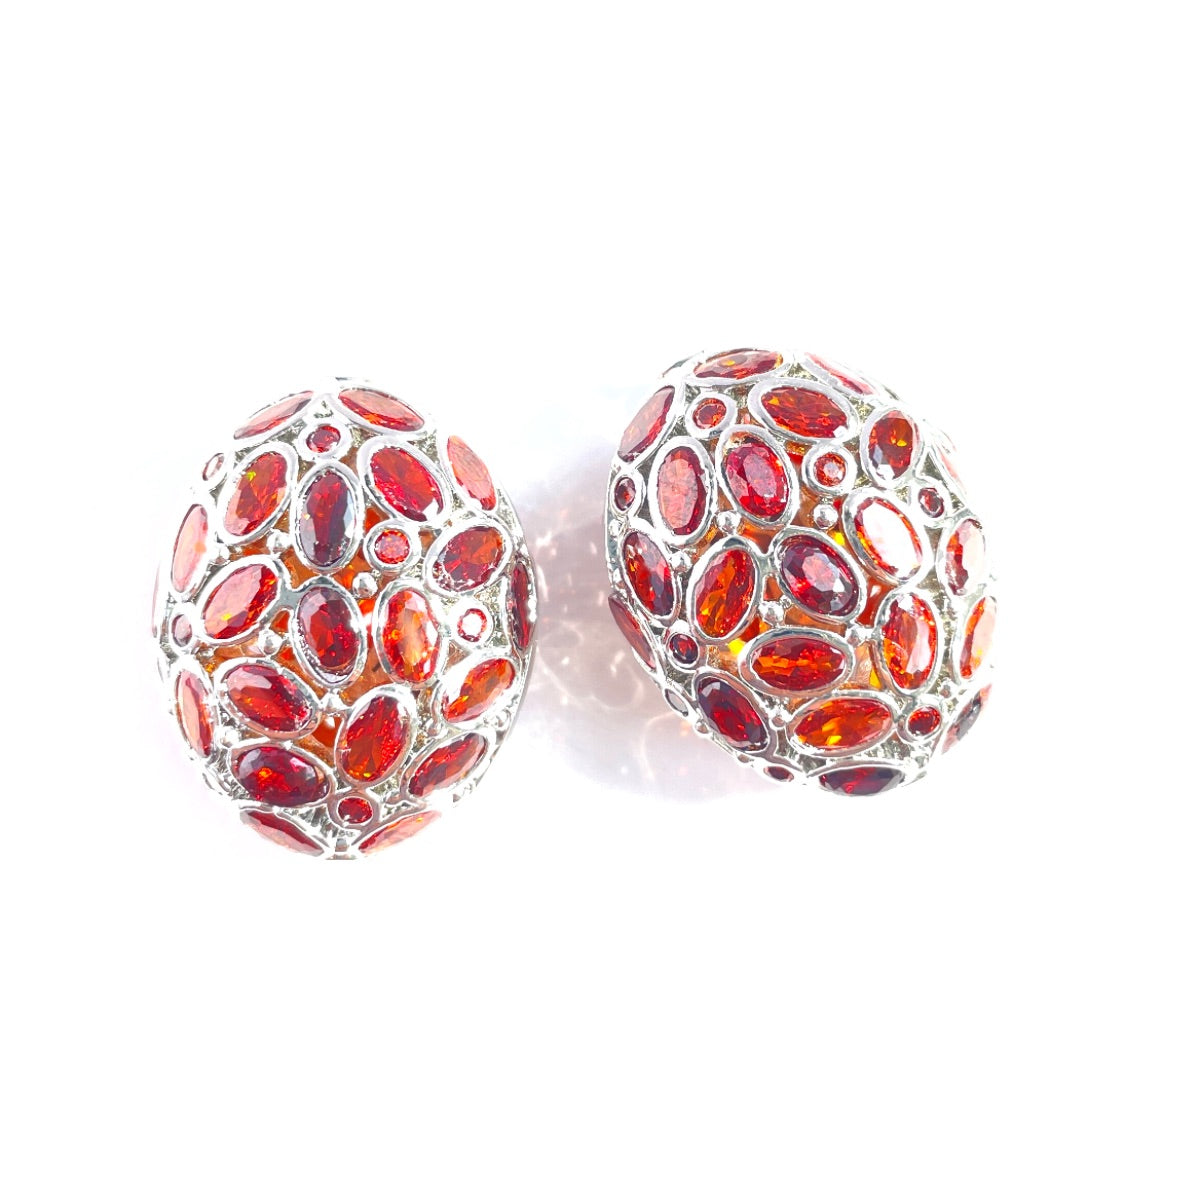 5pc 26.7*21mm Big Size Red CZ Hollow Flat Oval Centerpiece CZ Egg Beads Spacers Red on Silver CZ Paved Spacers Egg Beads Charms Beads Beyond